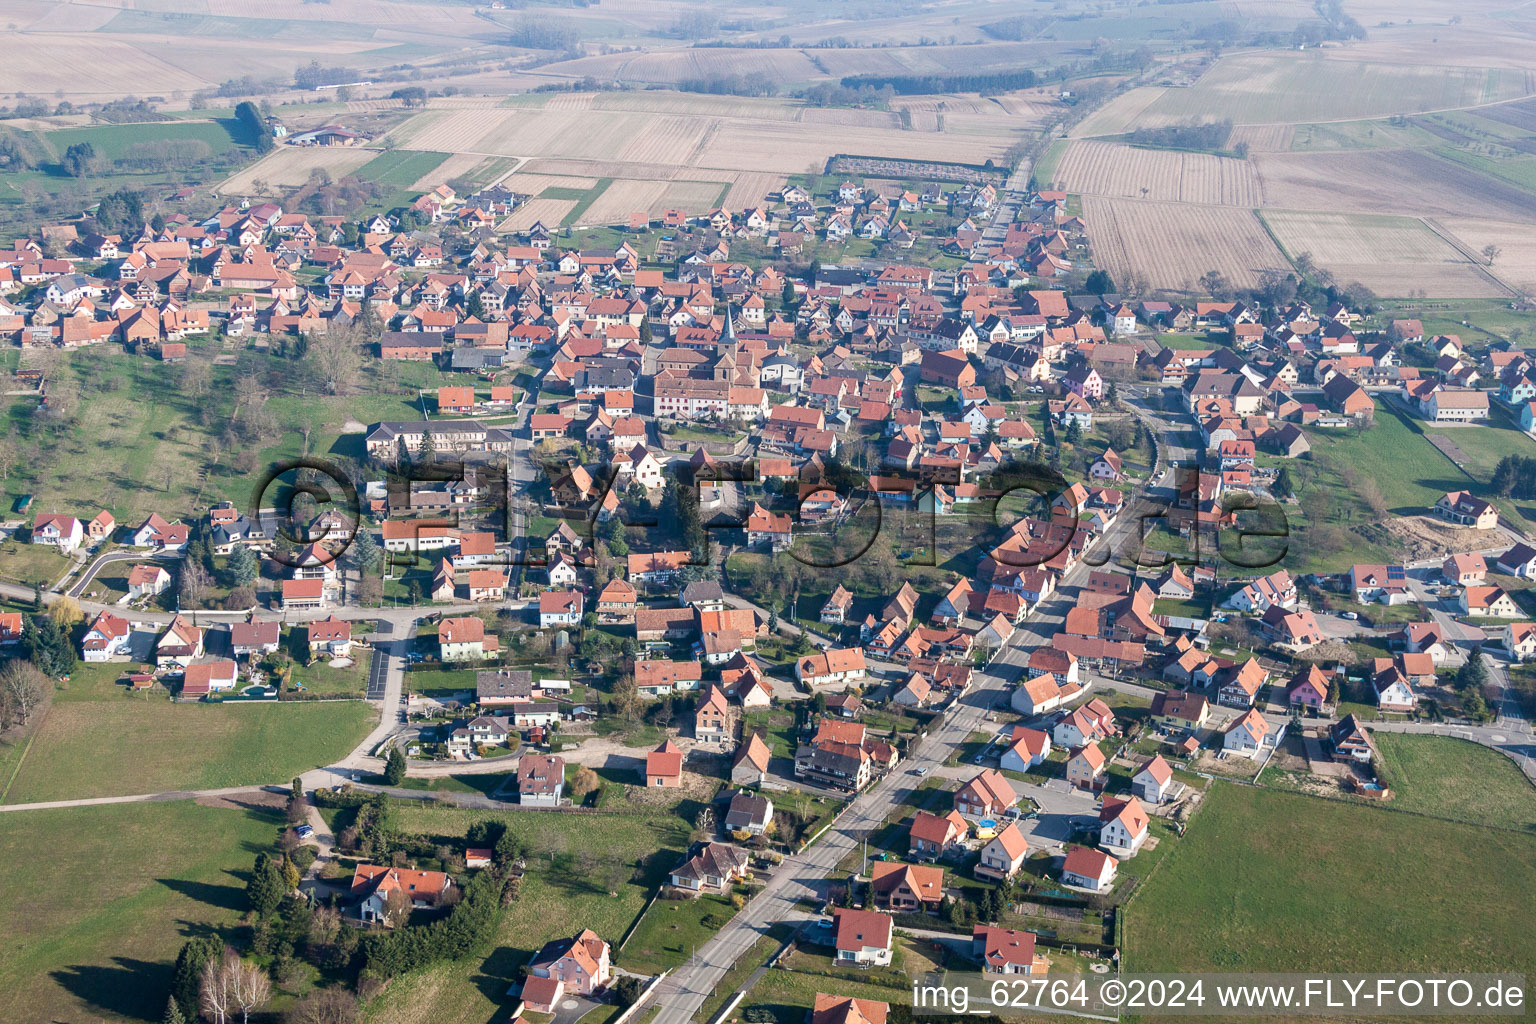 Oblique view of Village - view on the edge of agricultural fields and farmland in Surbourg in Grand Est, France